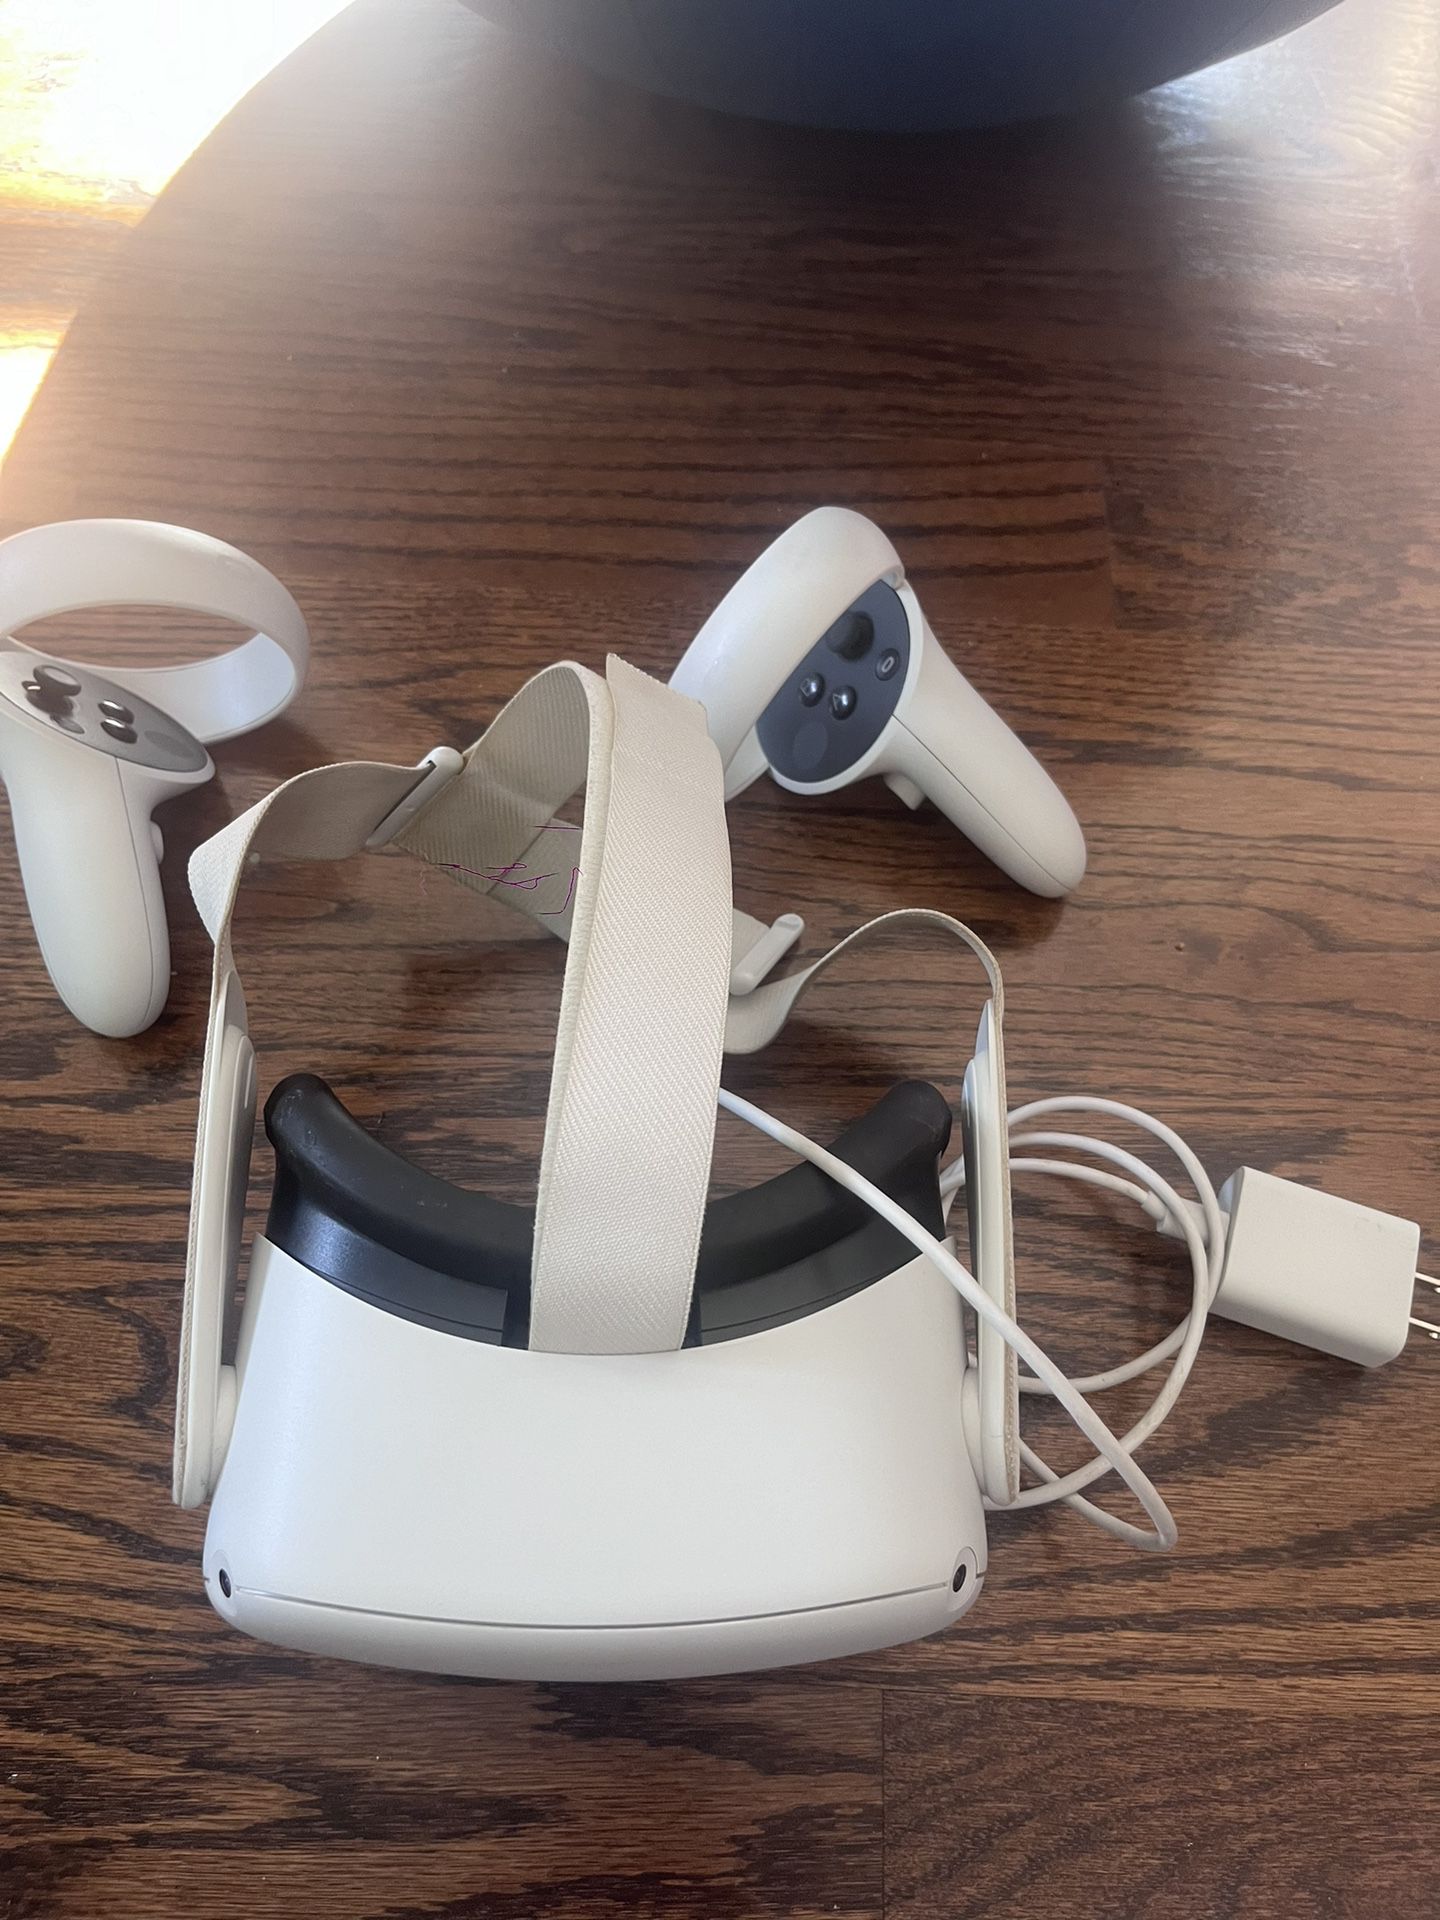 Meta Quest 2, Oculus VR (PRICE CAN BE NEGOTIATED)